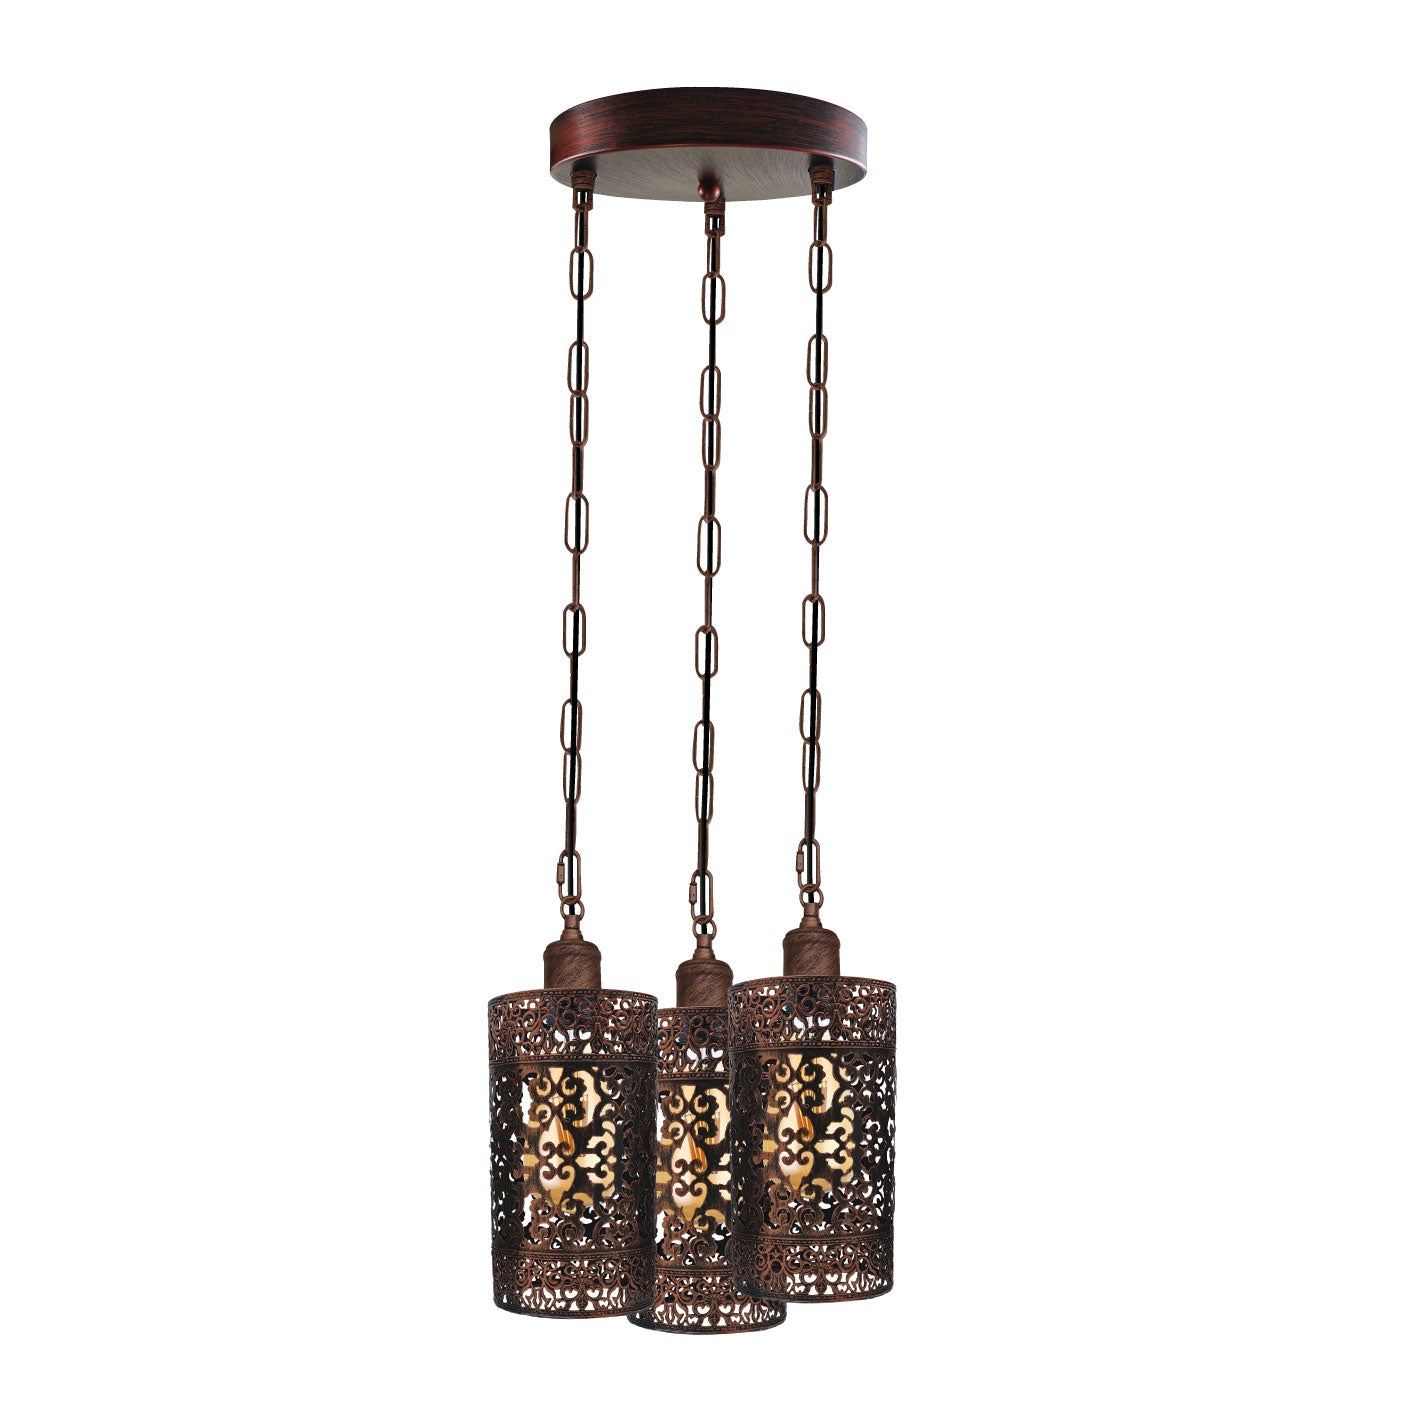 Industrial Retro pendant light 3-way Round ceiling base brushed finished Metal Ceiling Lamp Shade Pendant E27 lamp base for Home Living room Office Kitchen Restaurant.